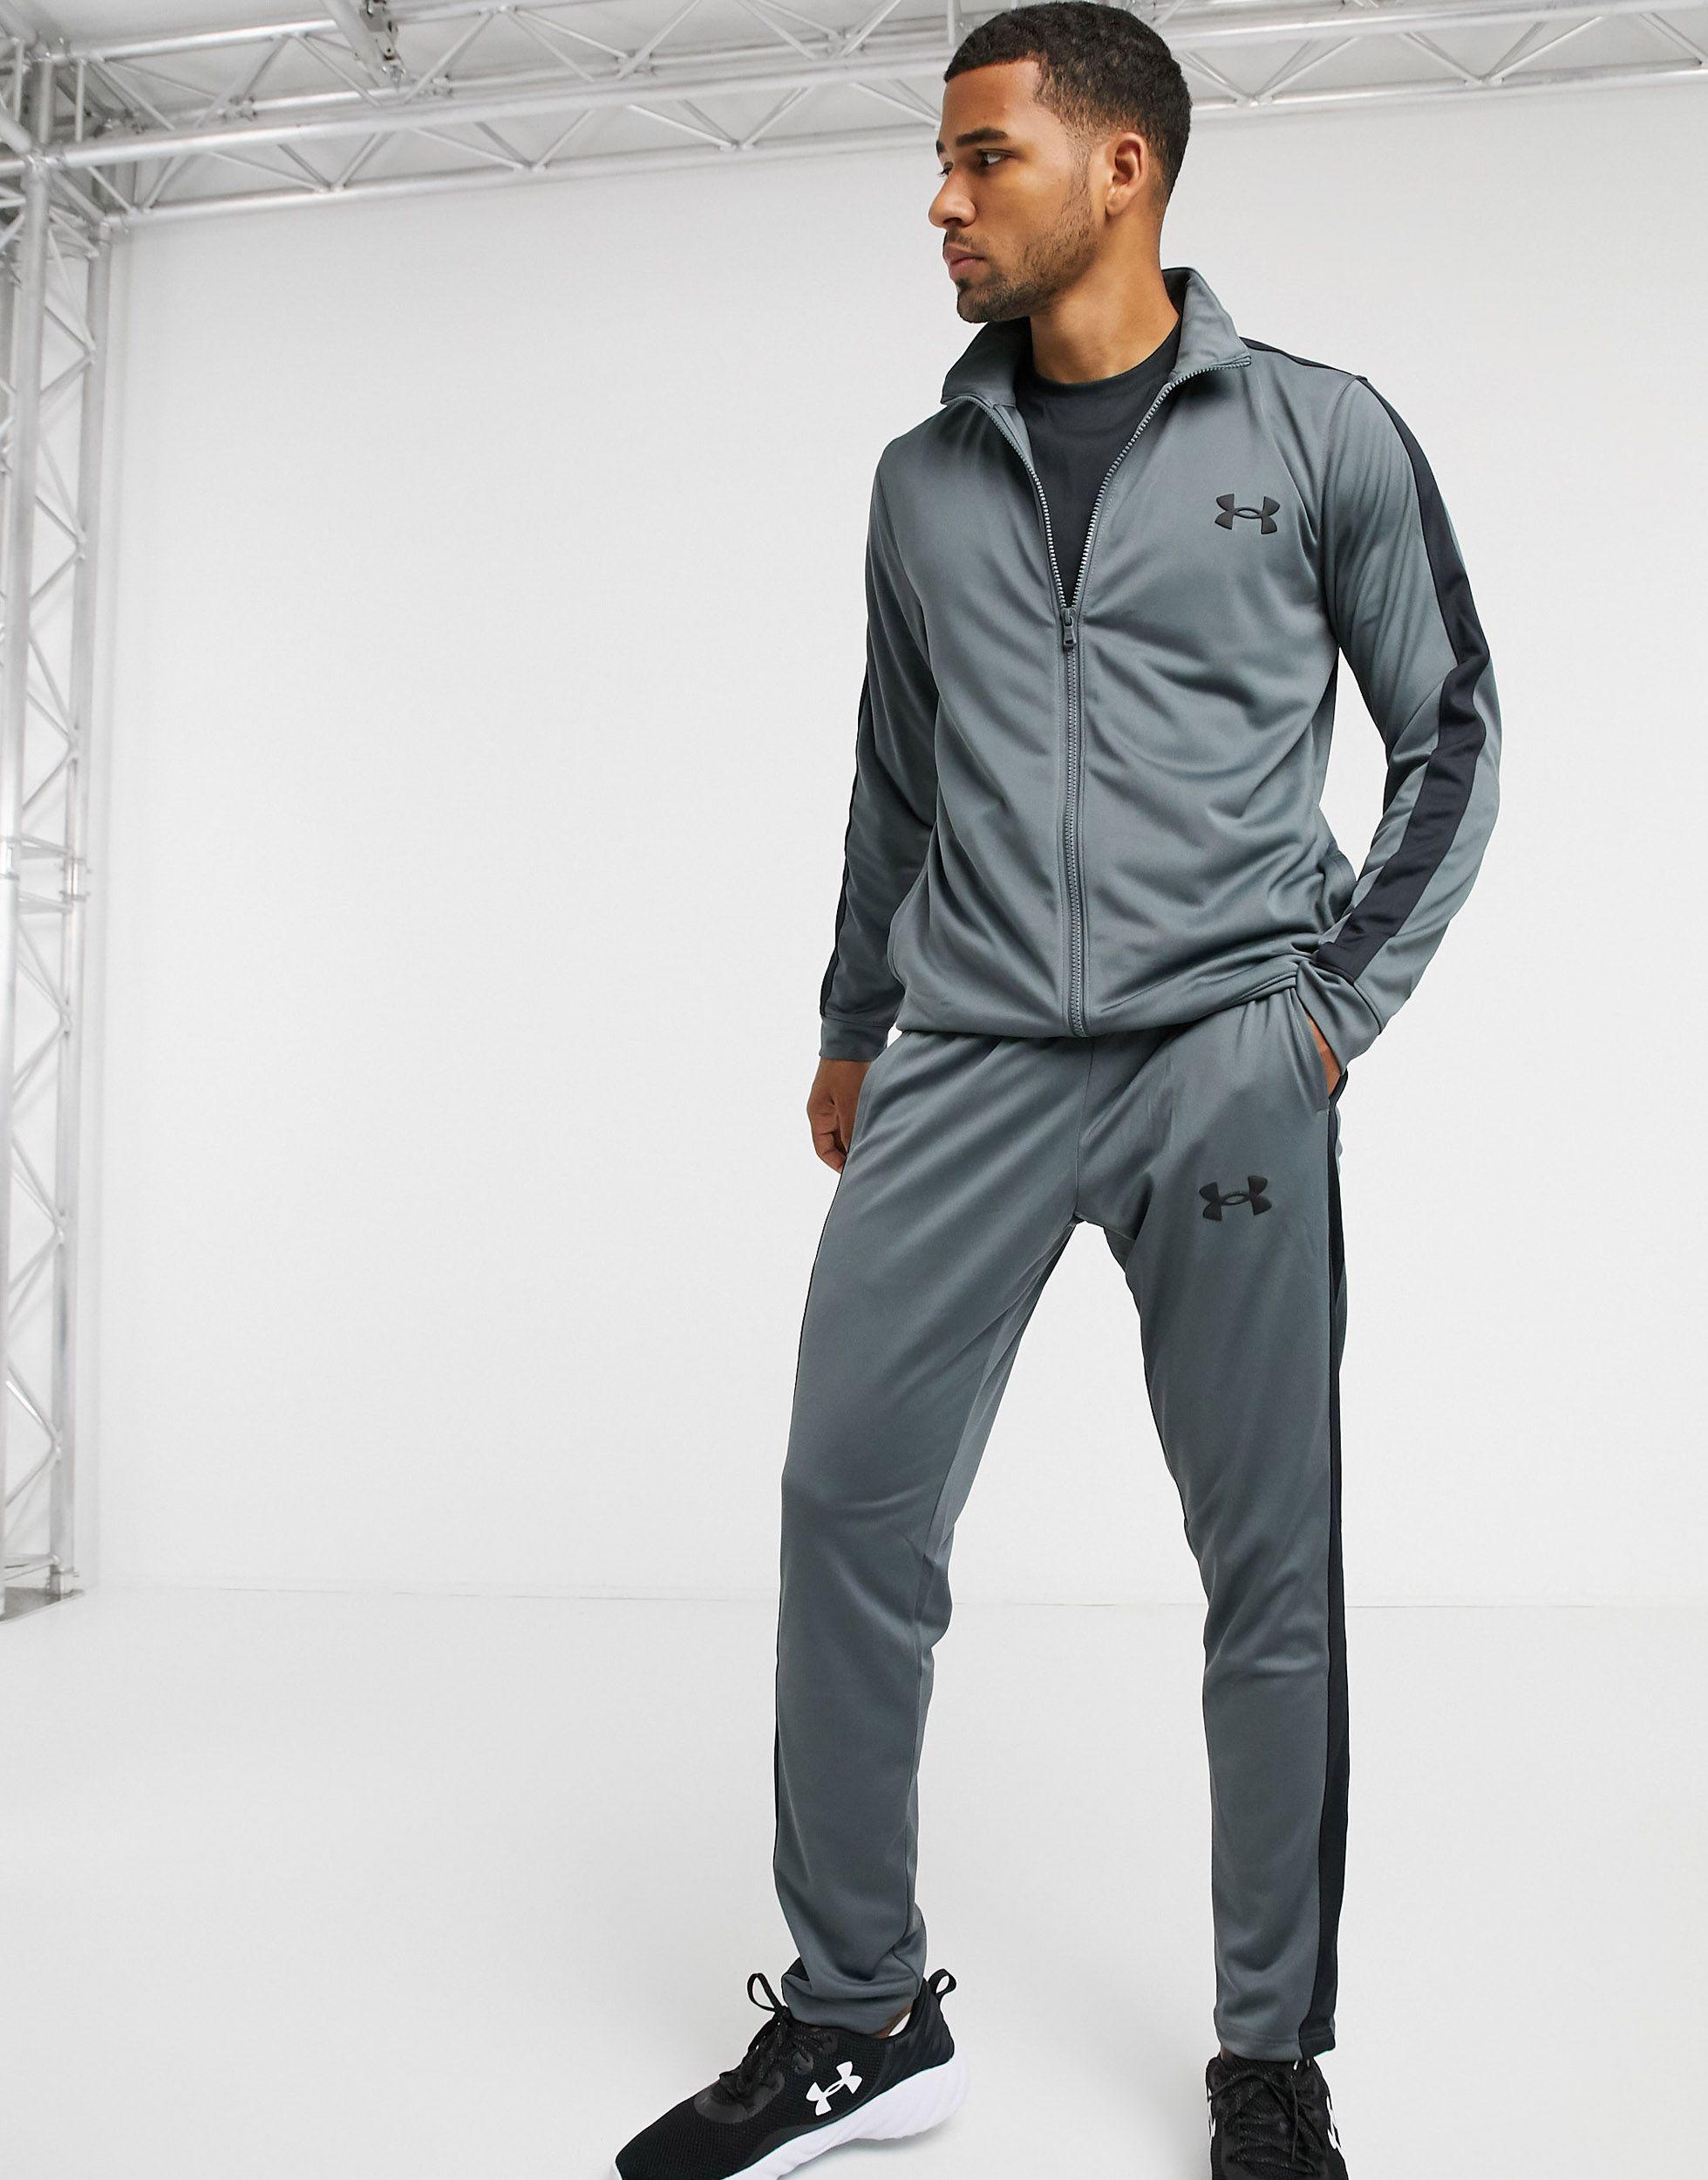 Details about   Mens New Under Armour Training Running Jacket Tracksuit Top Sweatshirt Grey